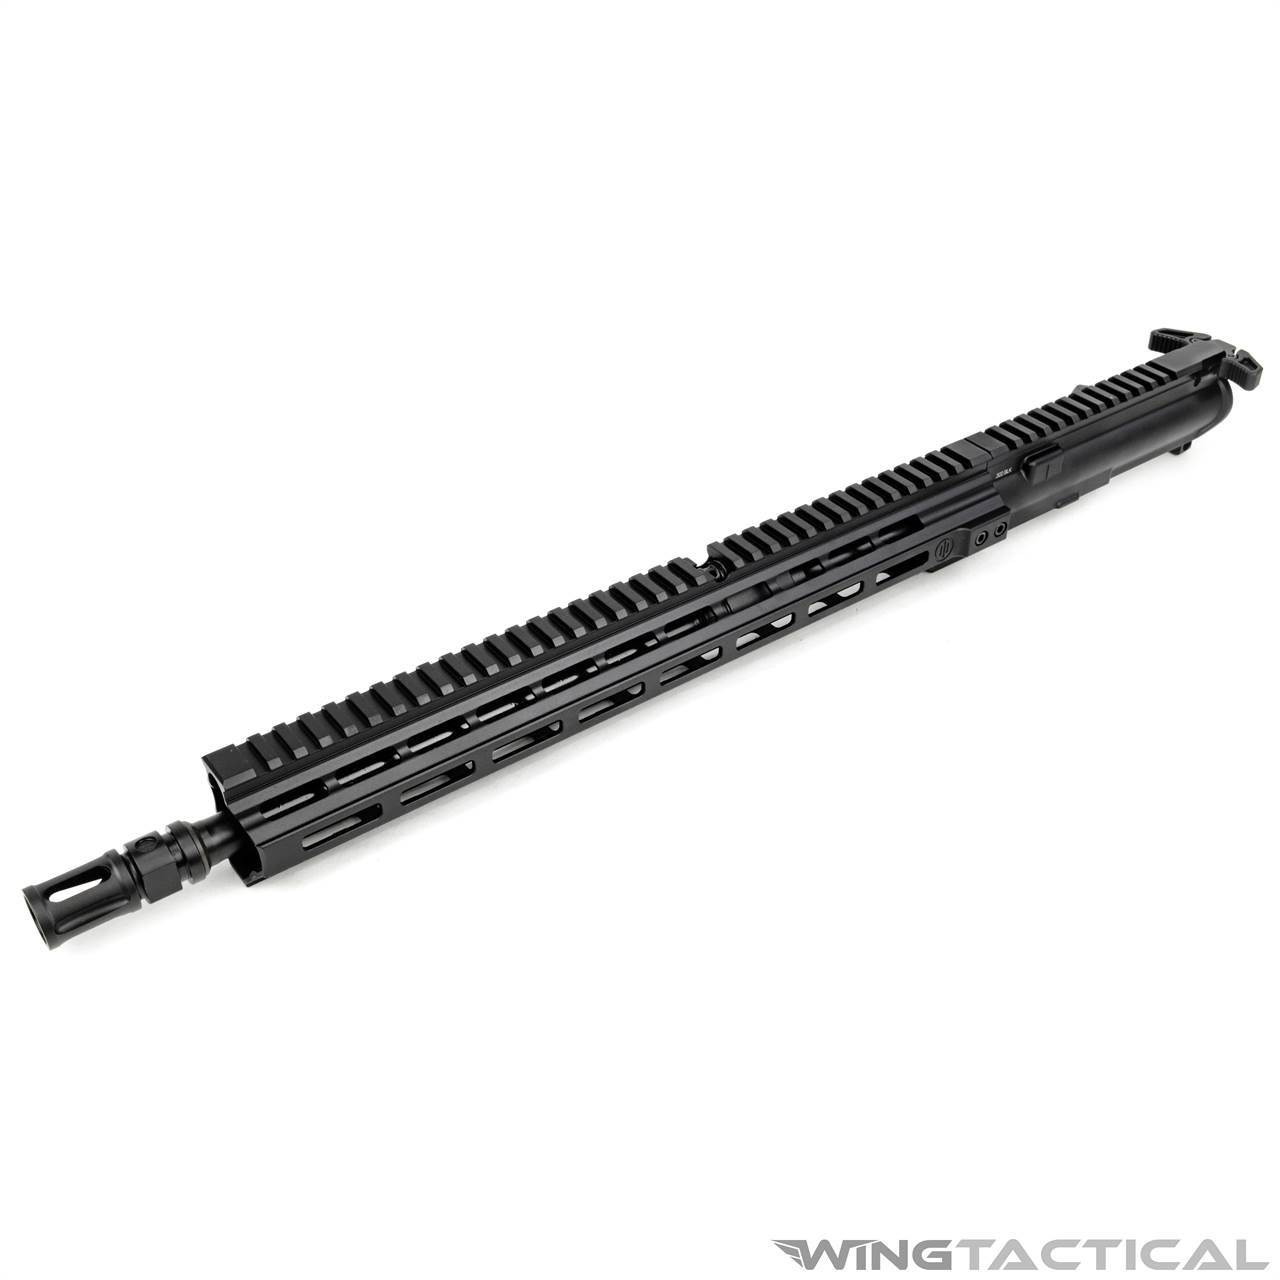 Primary Weapons Systems MK116 Piston Upper (16.1" 300BLK Barrel)